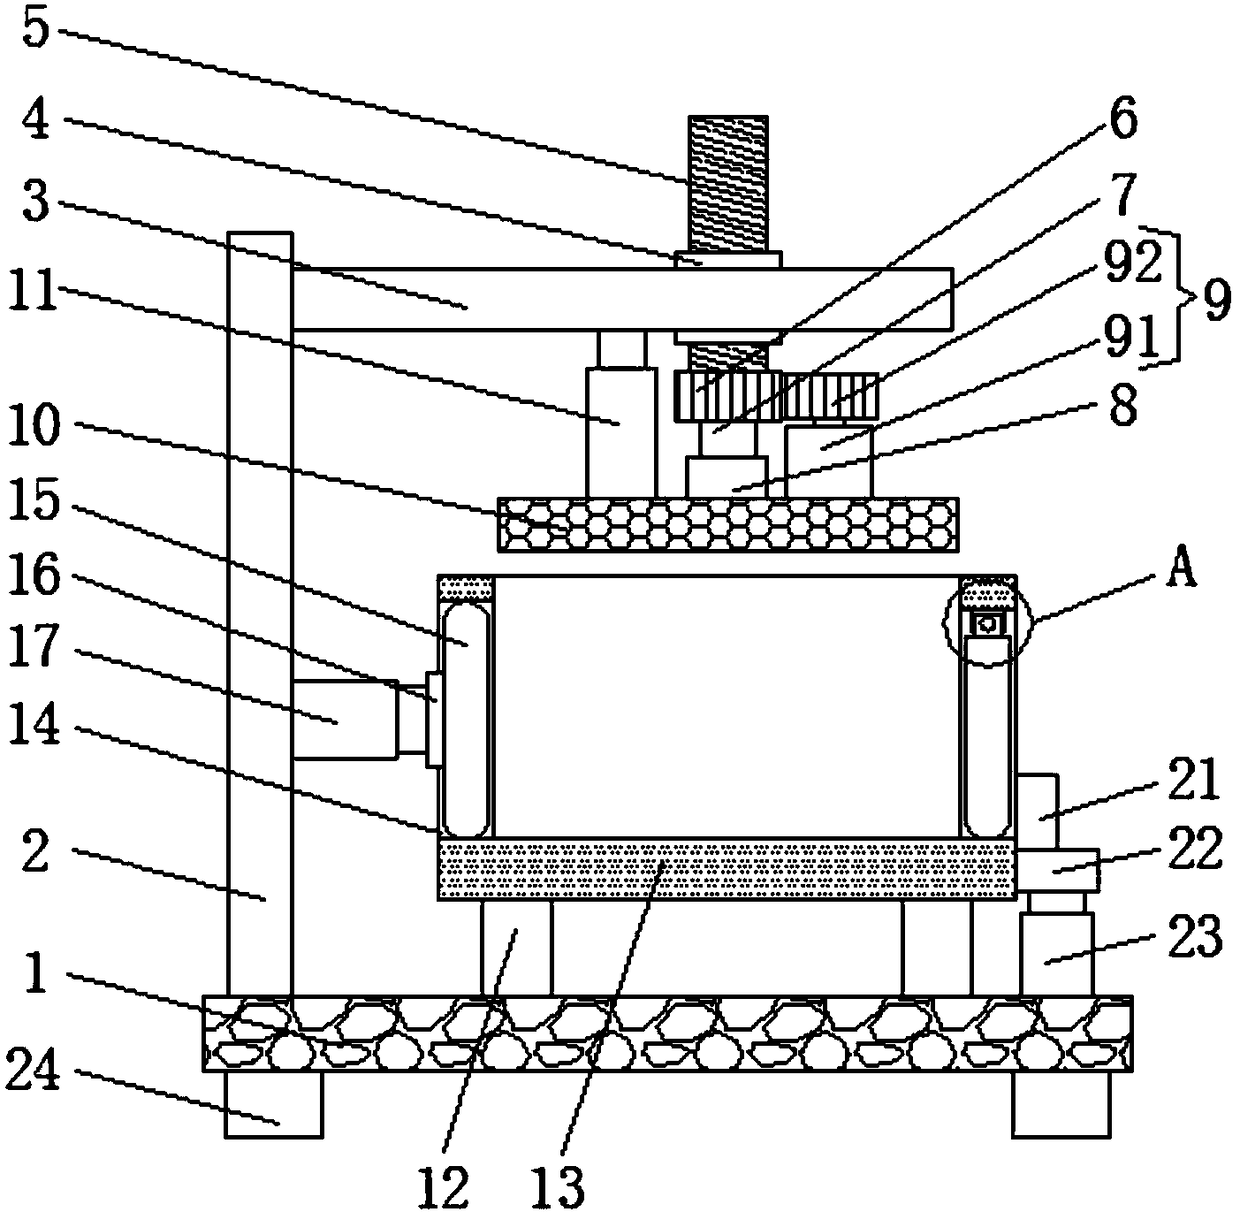 Wood waste centralized recovery device for wood processing